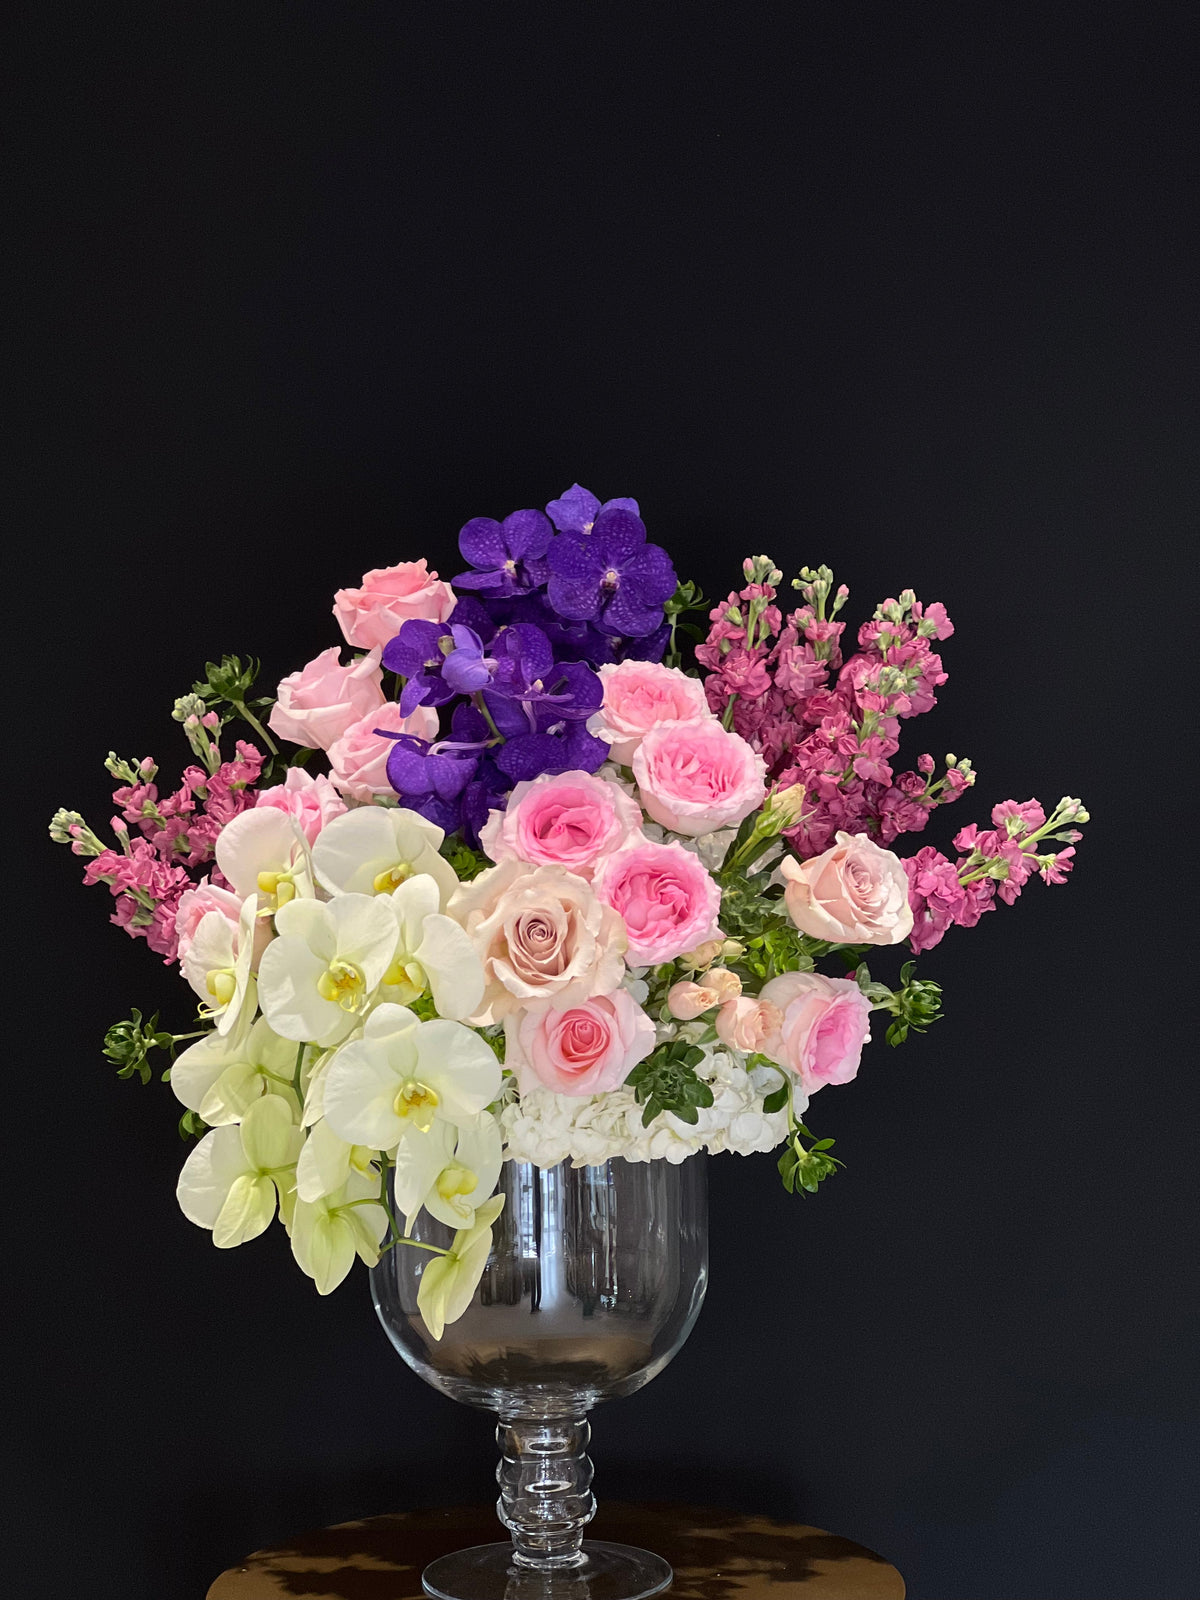 "Elegant Mother's Day Flowers from Yonge Florist - Flowers for Mom" Vase arrangement of orchids, roses and stocks.